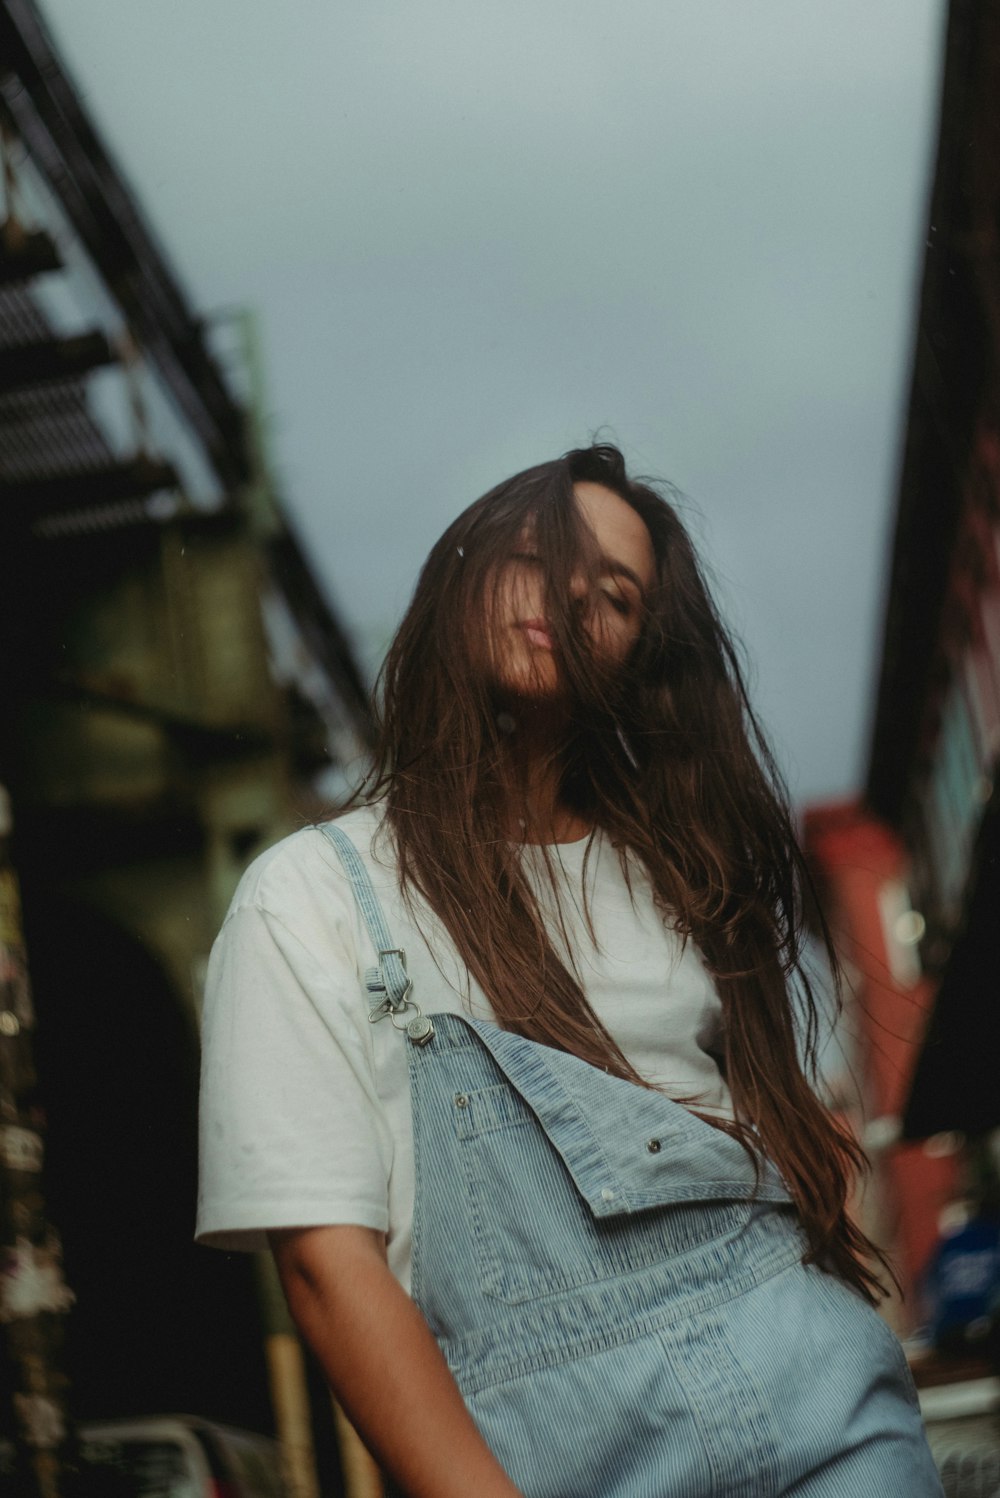 A woman with long hair wearing overalls and a white t - shirt photo – Free  Face Image on Unsplash